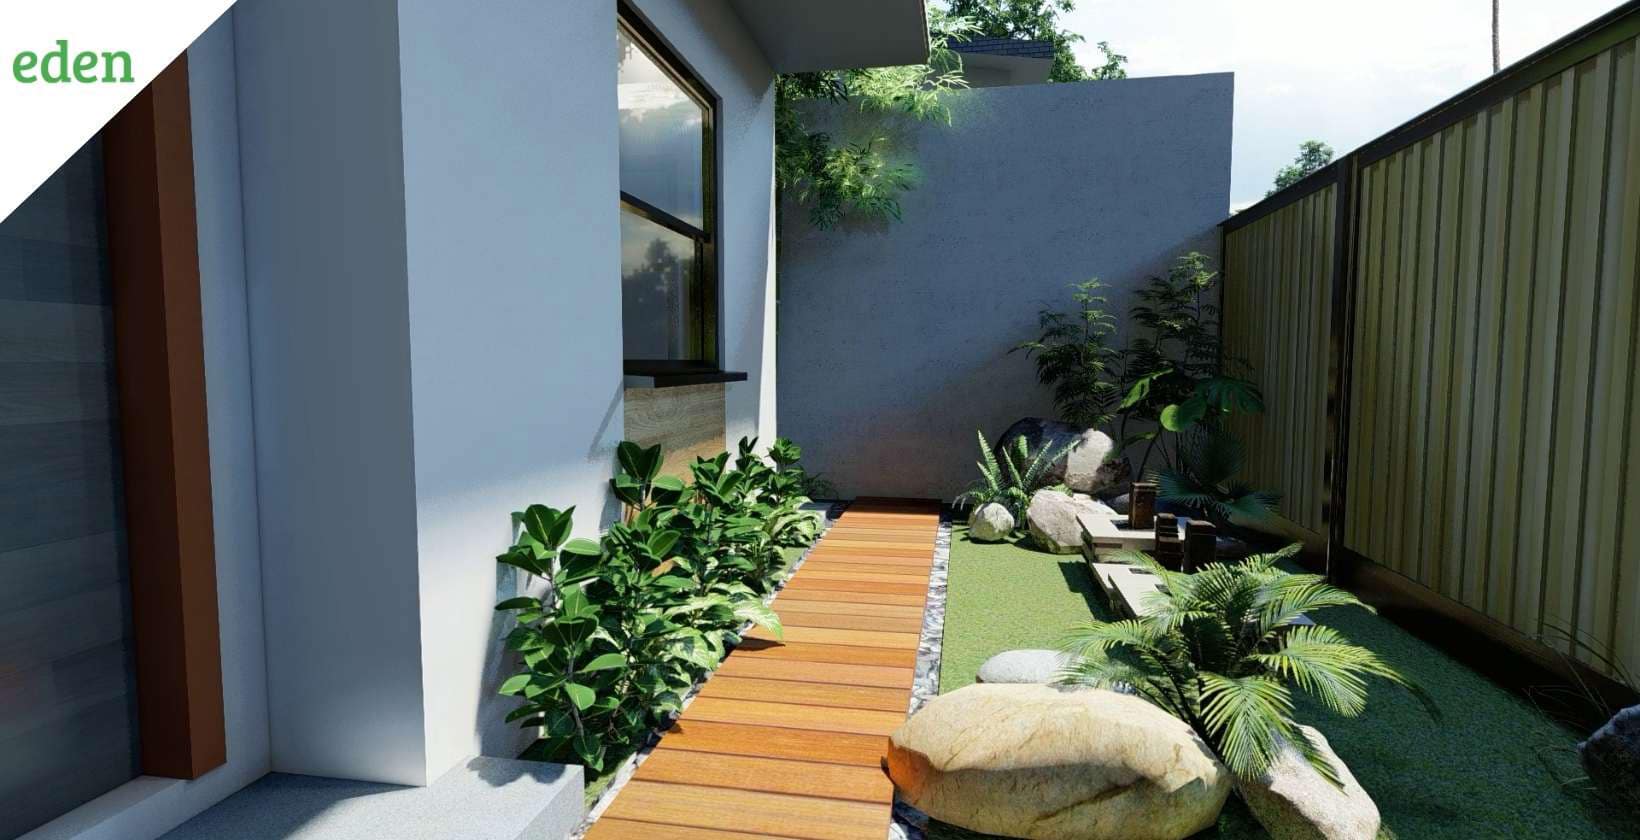 Landscaping ideas for a small front yard